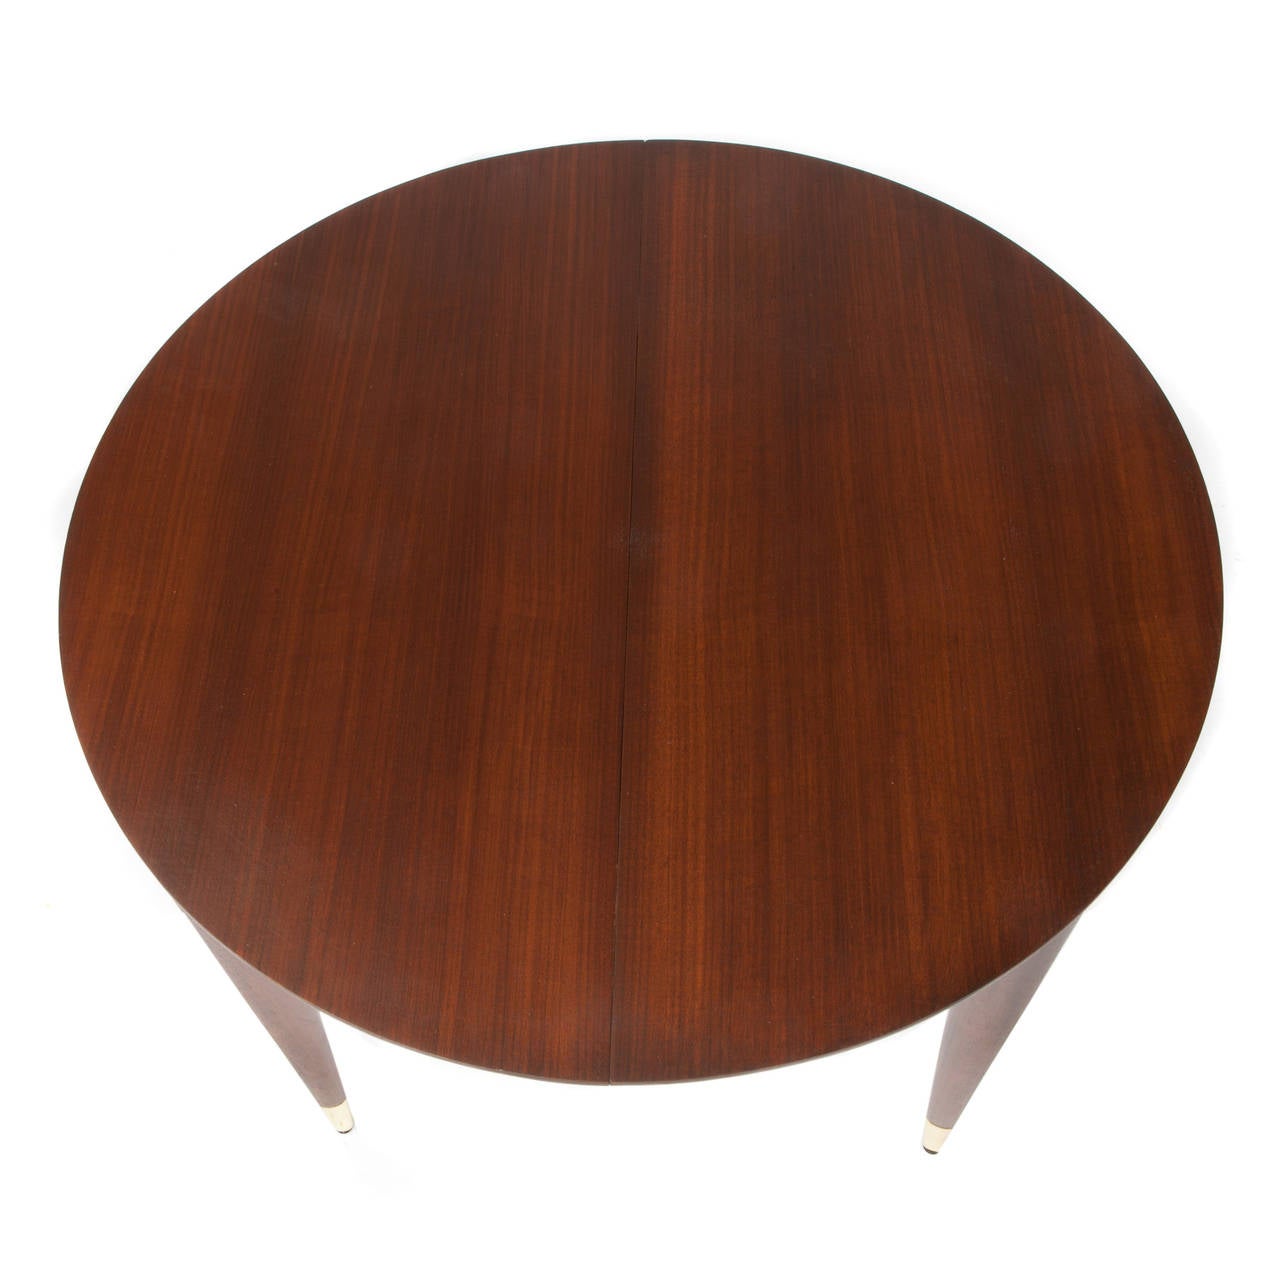 Plated Walnut Extension Dining Table by Gio Ponti